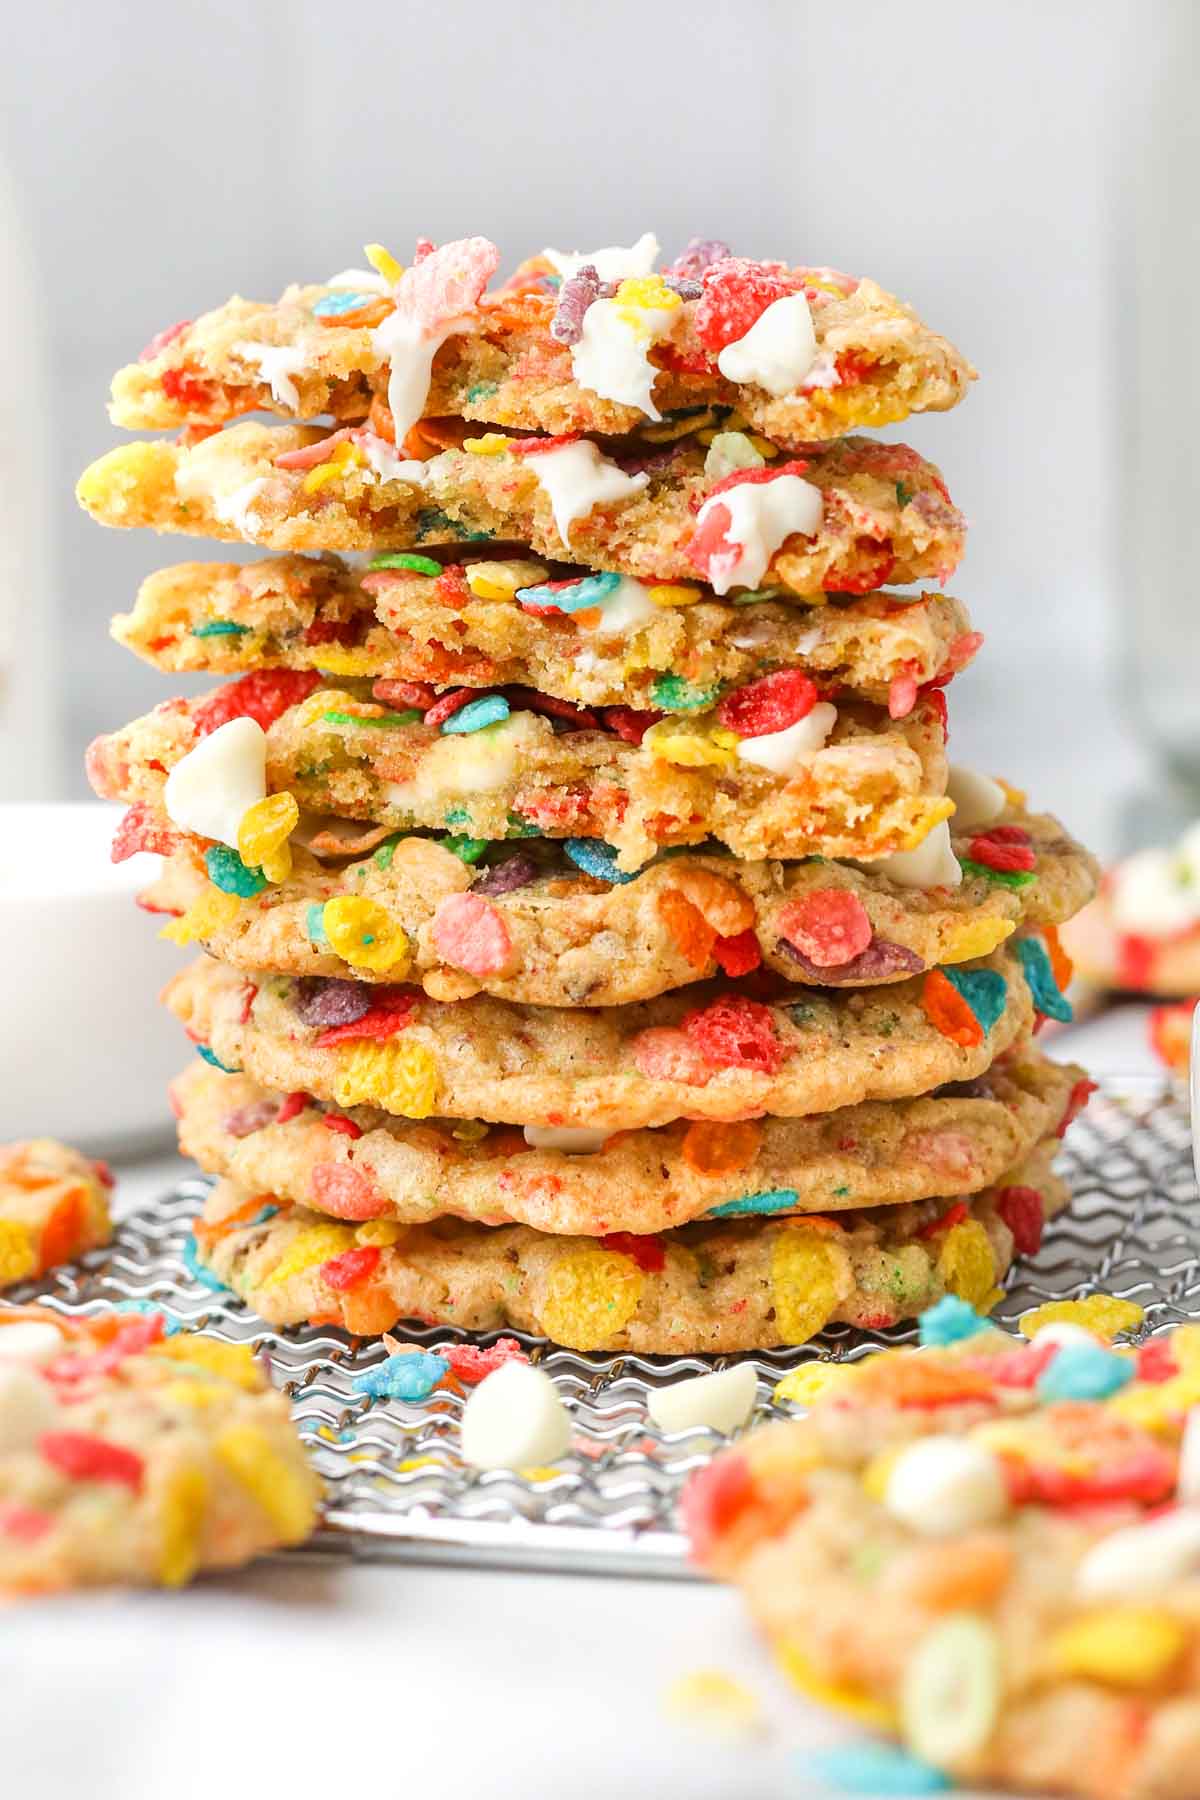 a thick stack of freshly baked cookies with white chocolate chips melting out of the insides.